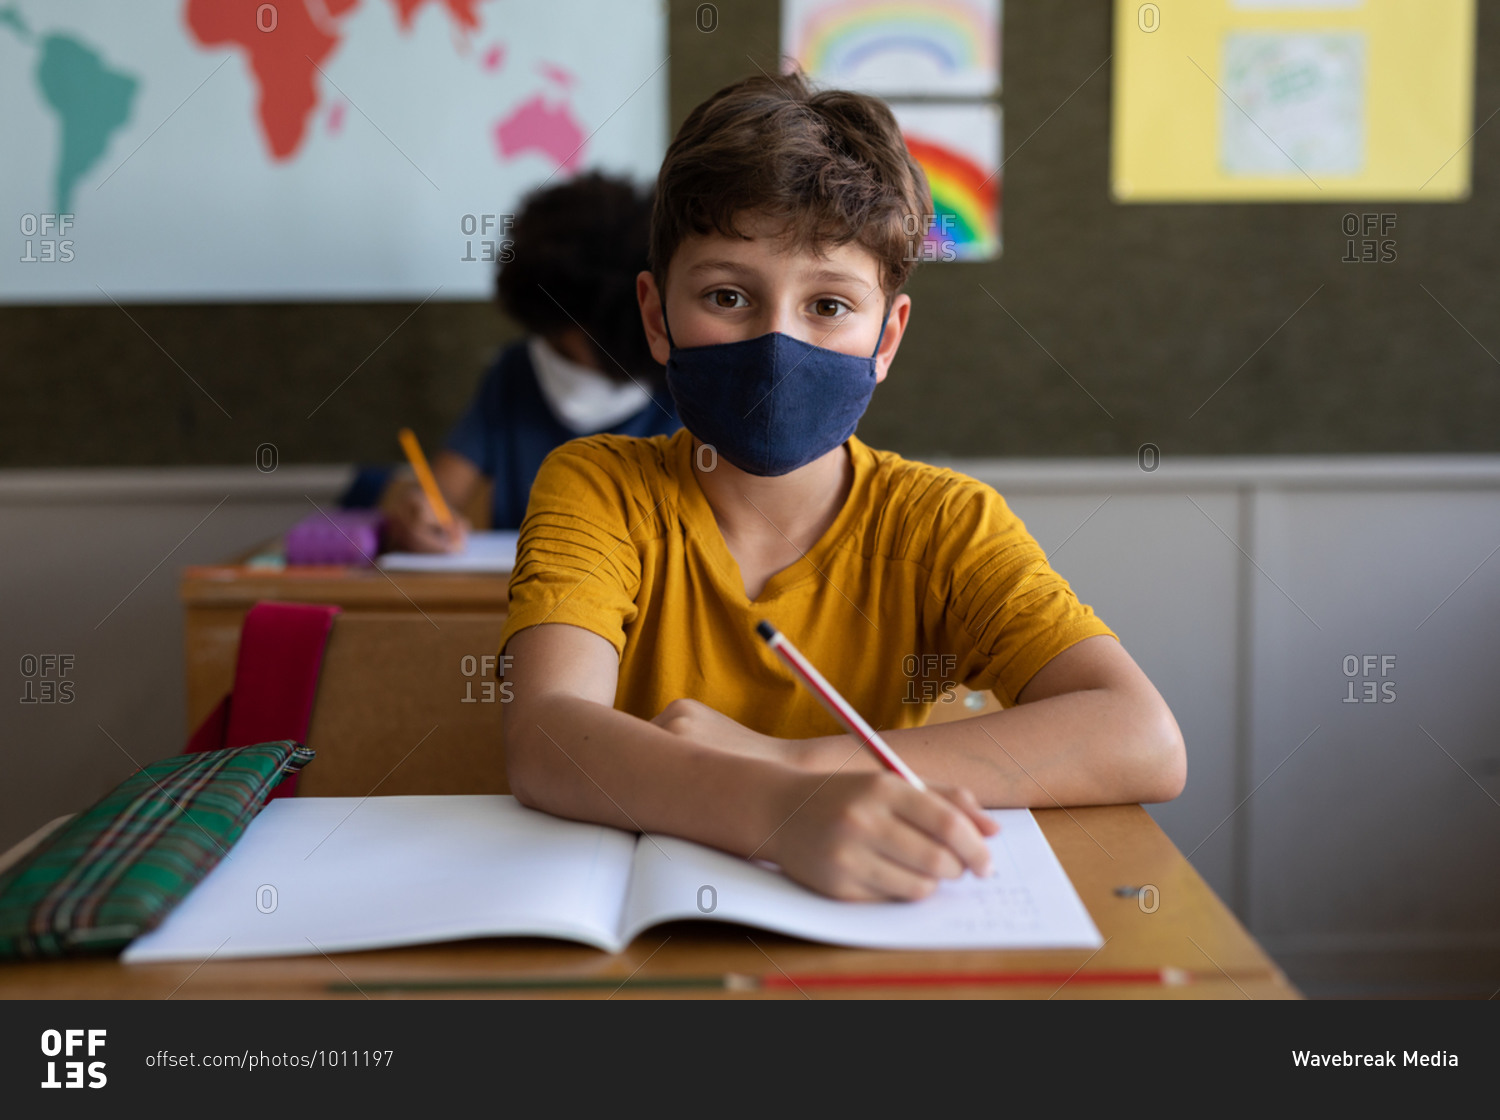 Two multi ethnic children sitting at desks wearing face masks in classroom. Primary education social distancing health safety during Covid19 Coronavirus pandemic.